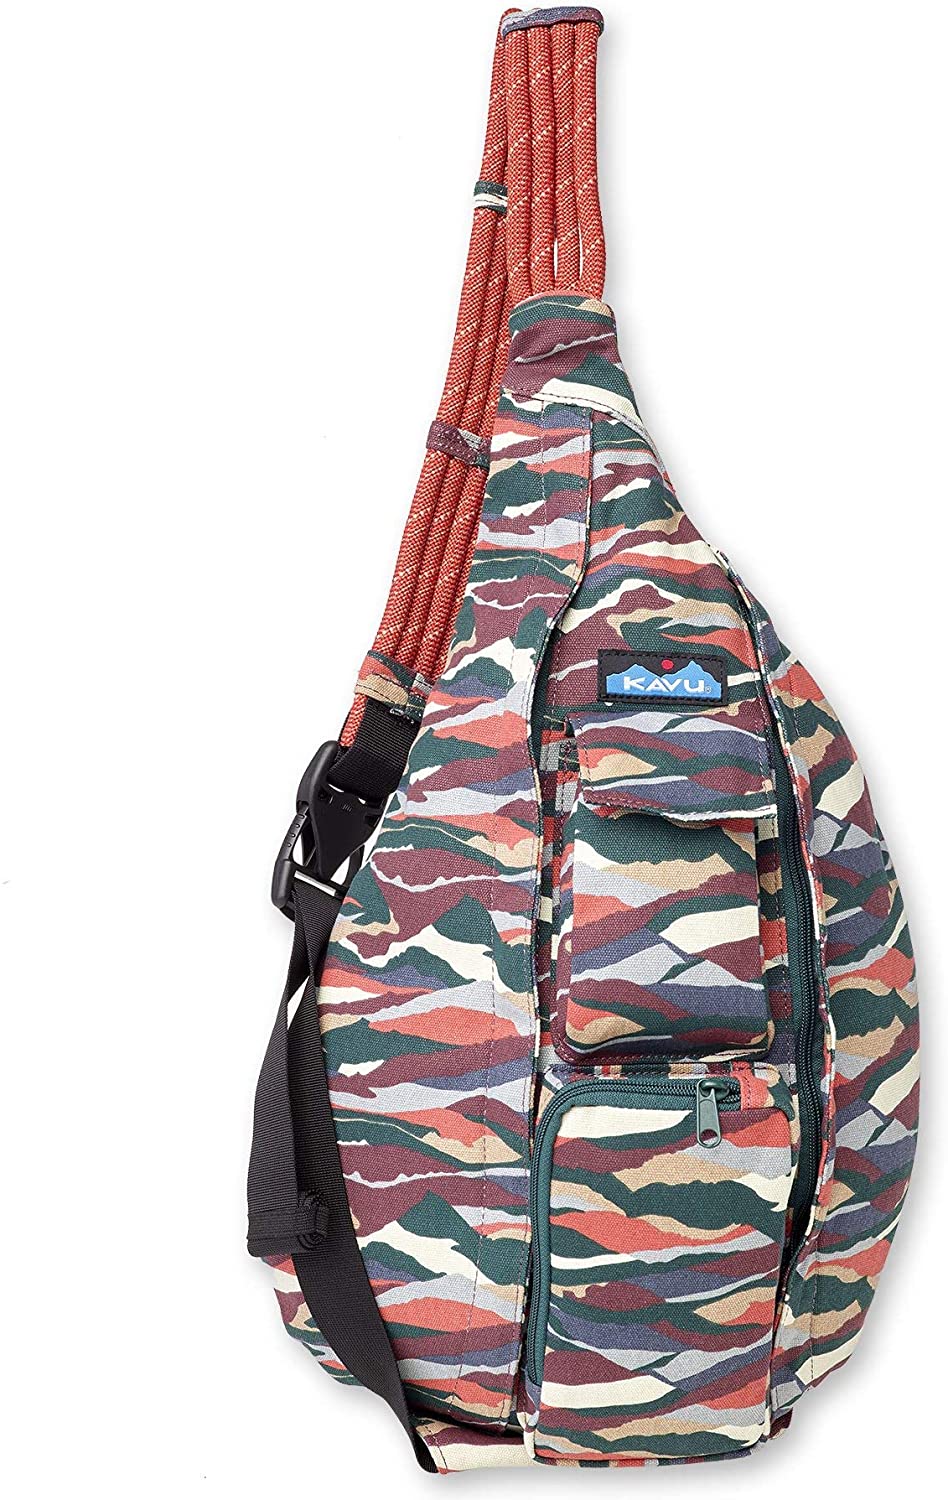 KAVU Rope Bag - Sling Pack for Hiking, Camping, and Commuting - Black